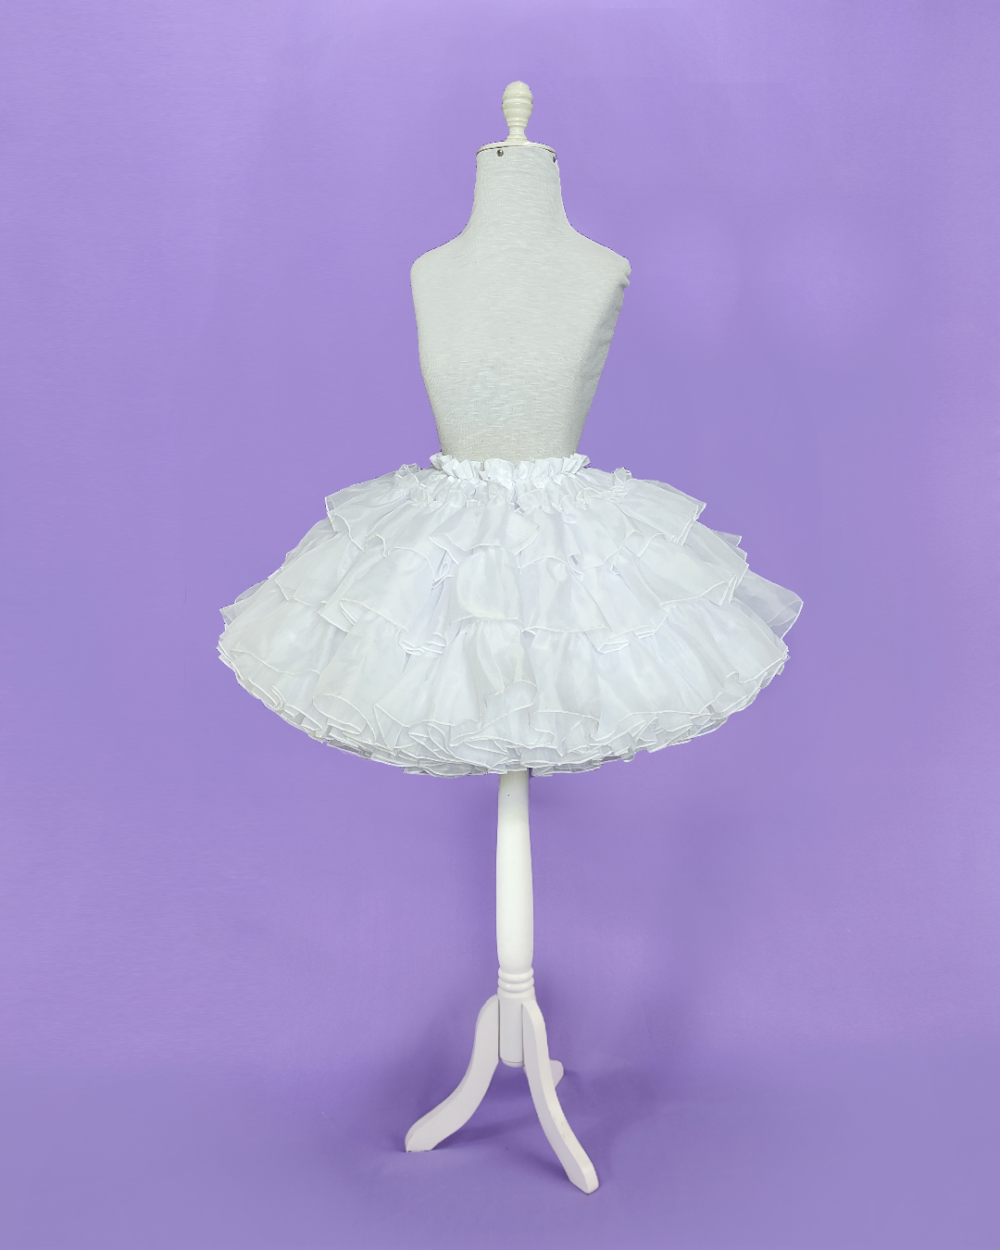 Petticoat made in white voile and lined.